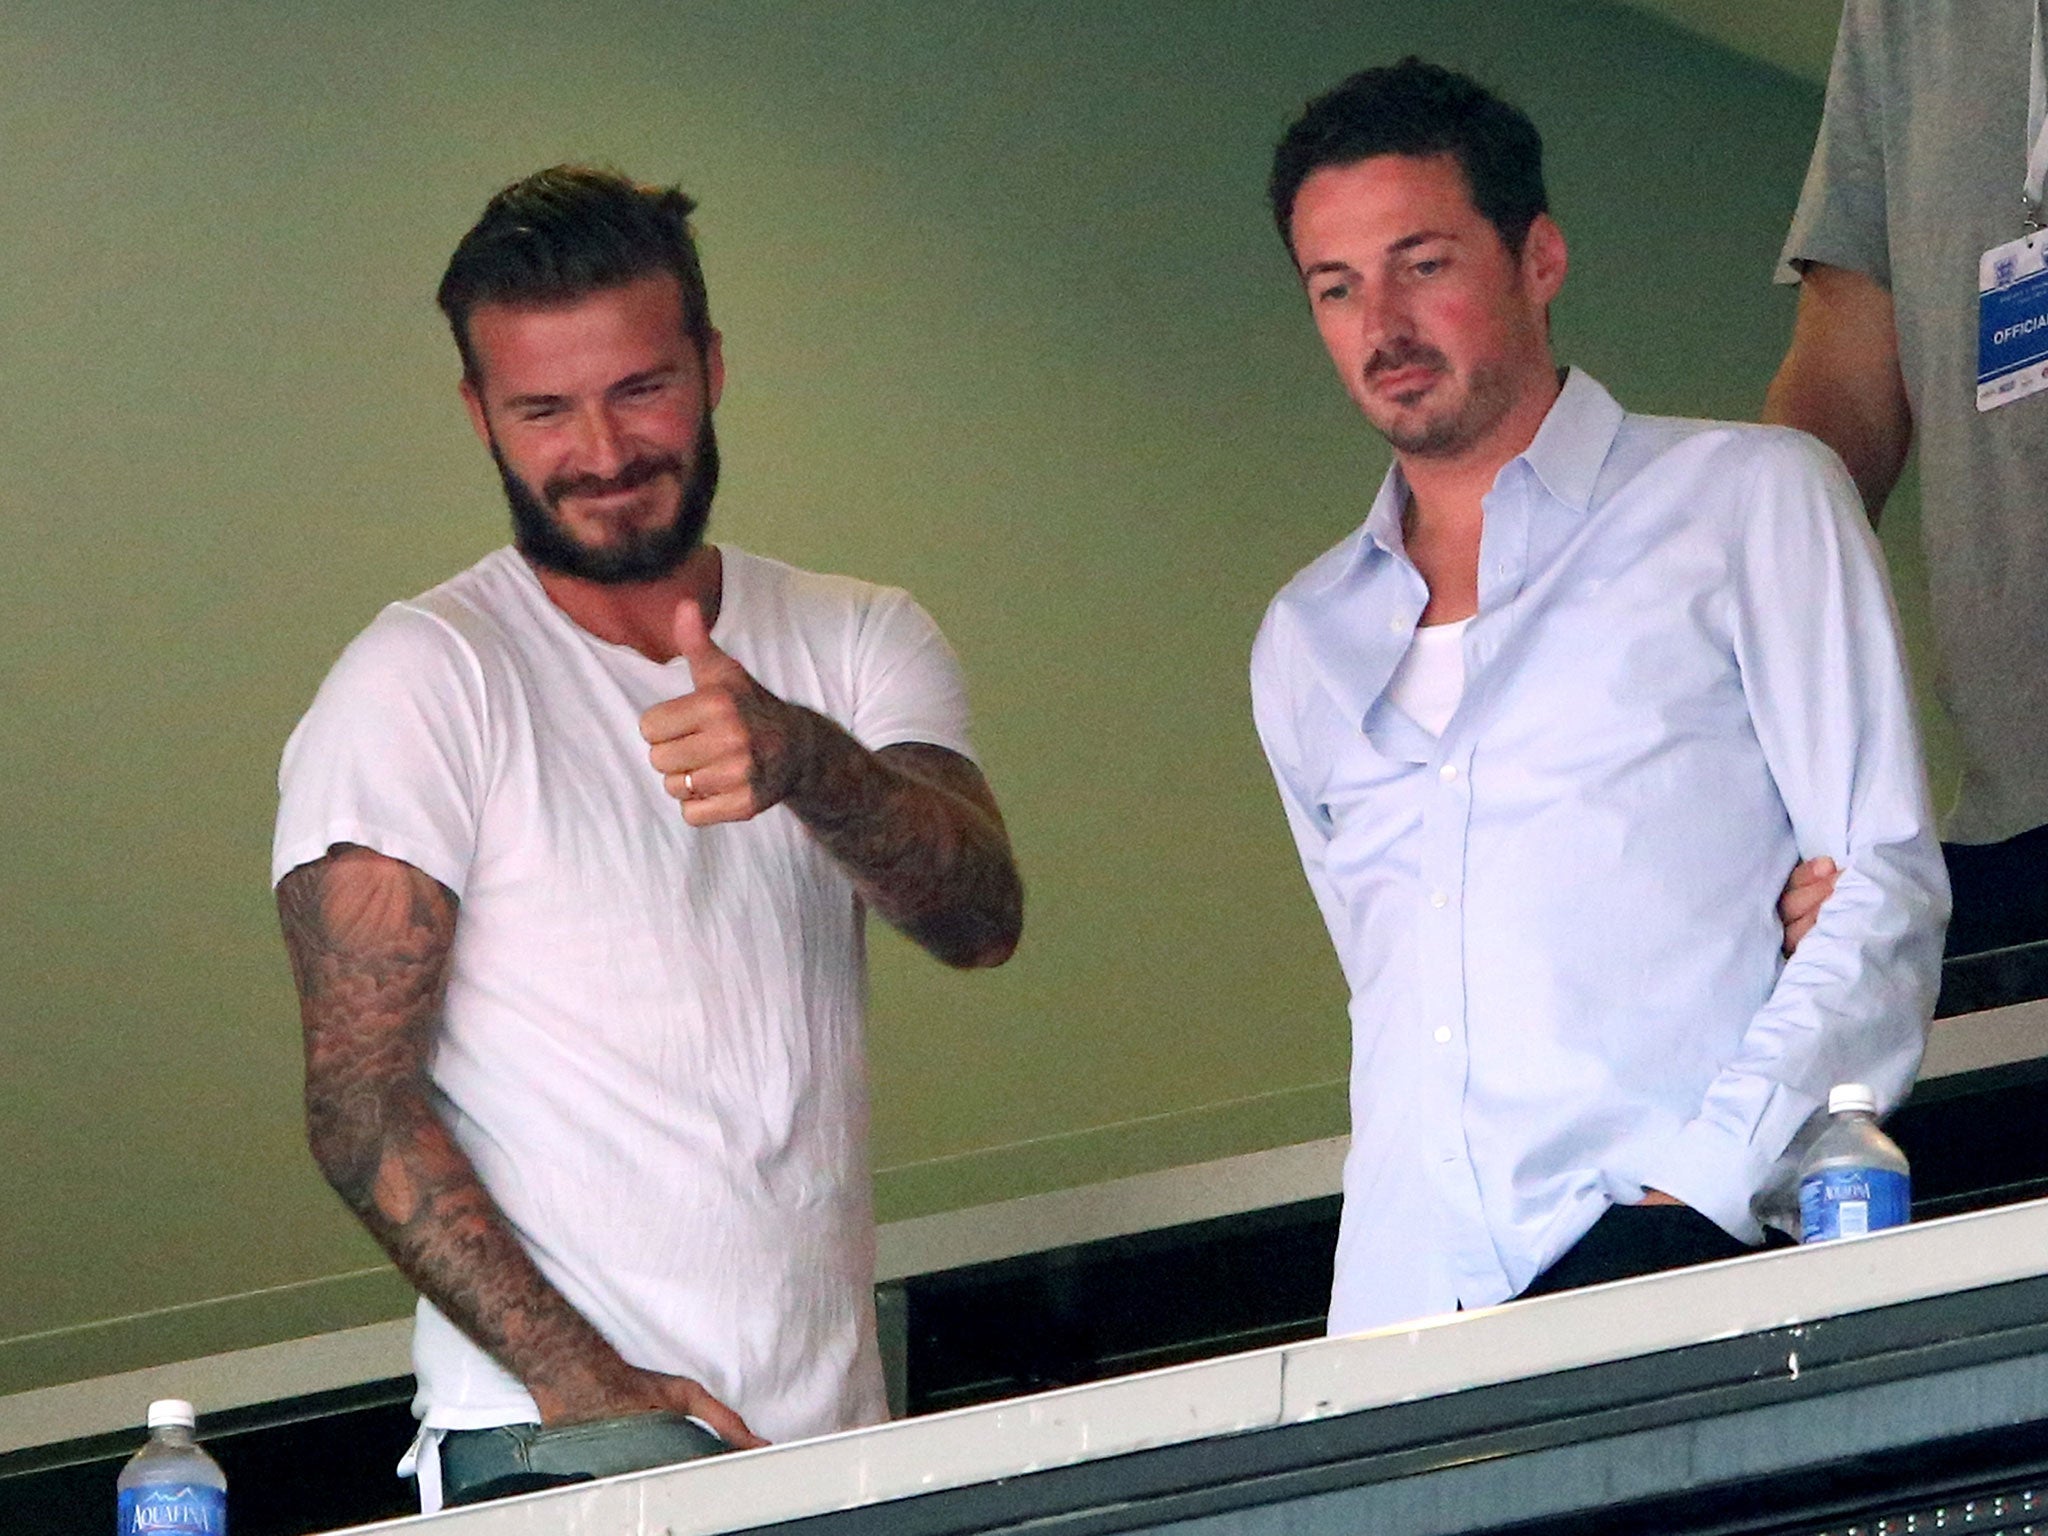 David Beckham gives the thumbs up at Miami's Sun Life Stadium as he watches the goalless draw between England and Miami